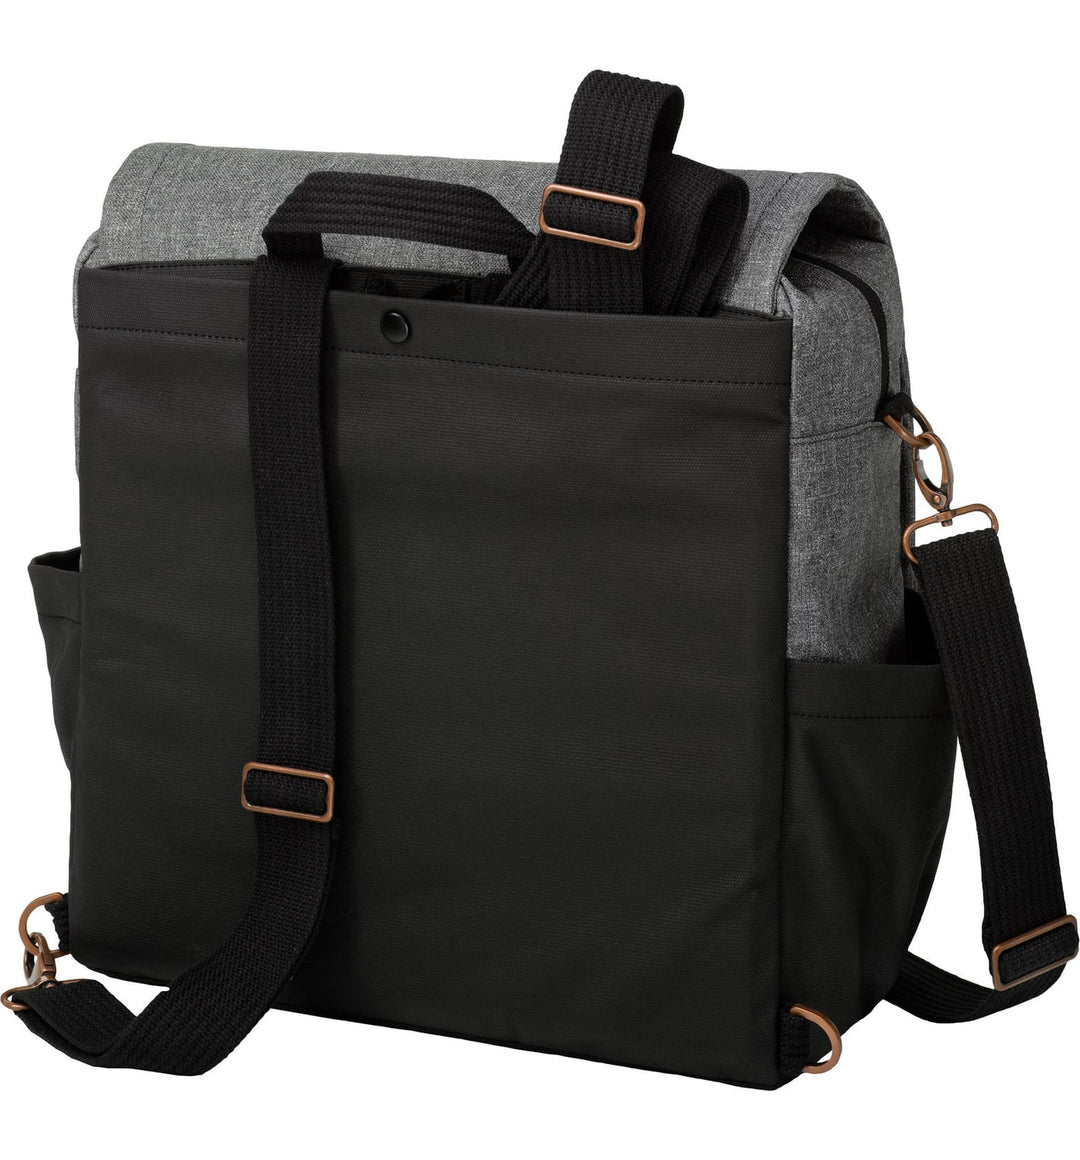 Boxy Backpack in Graphite / Black